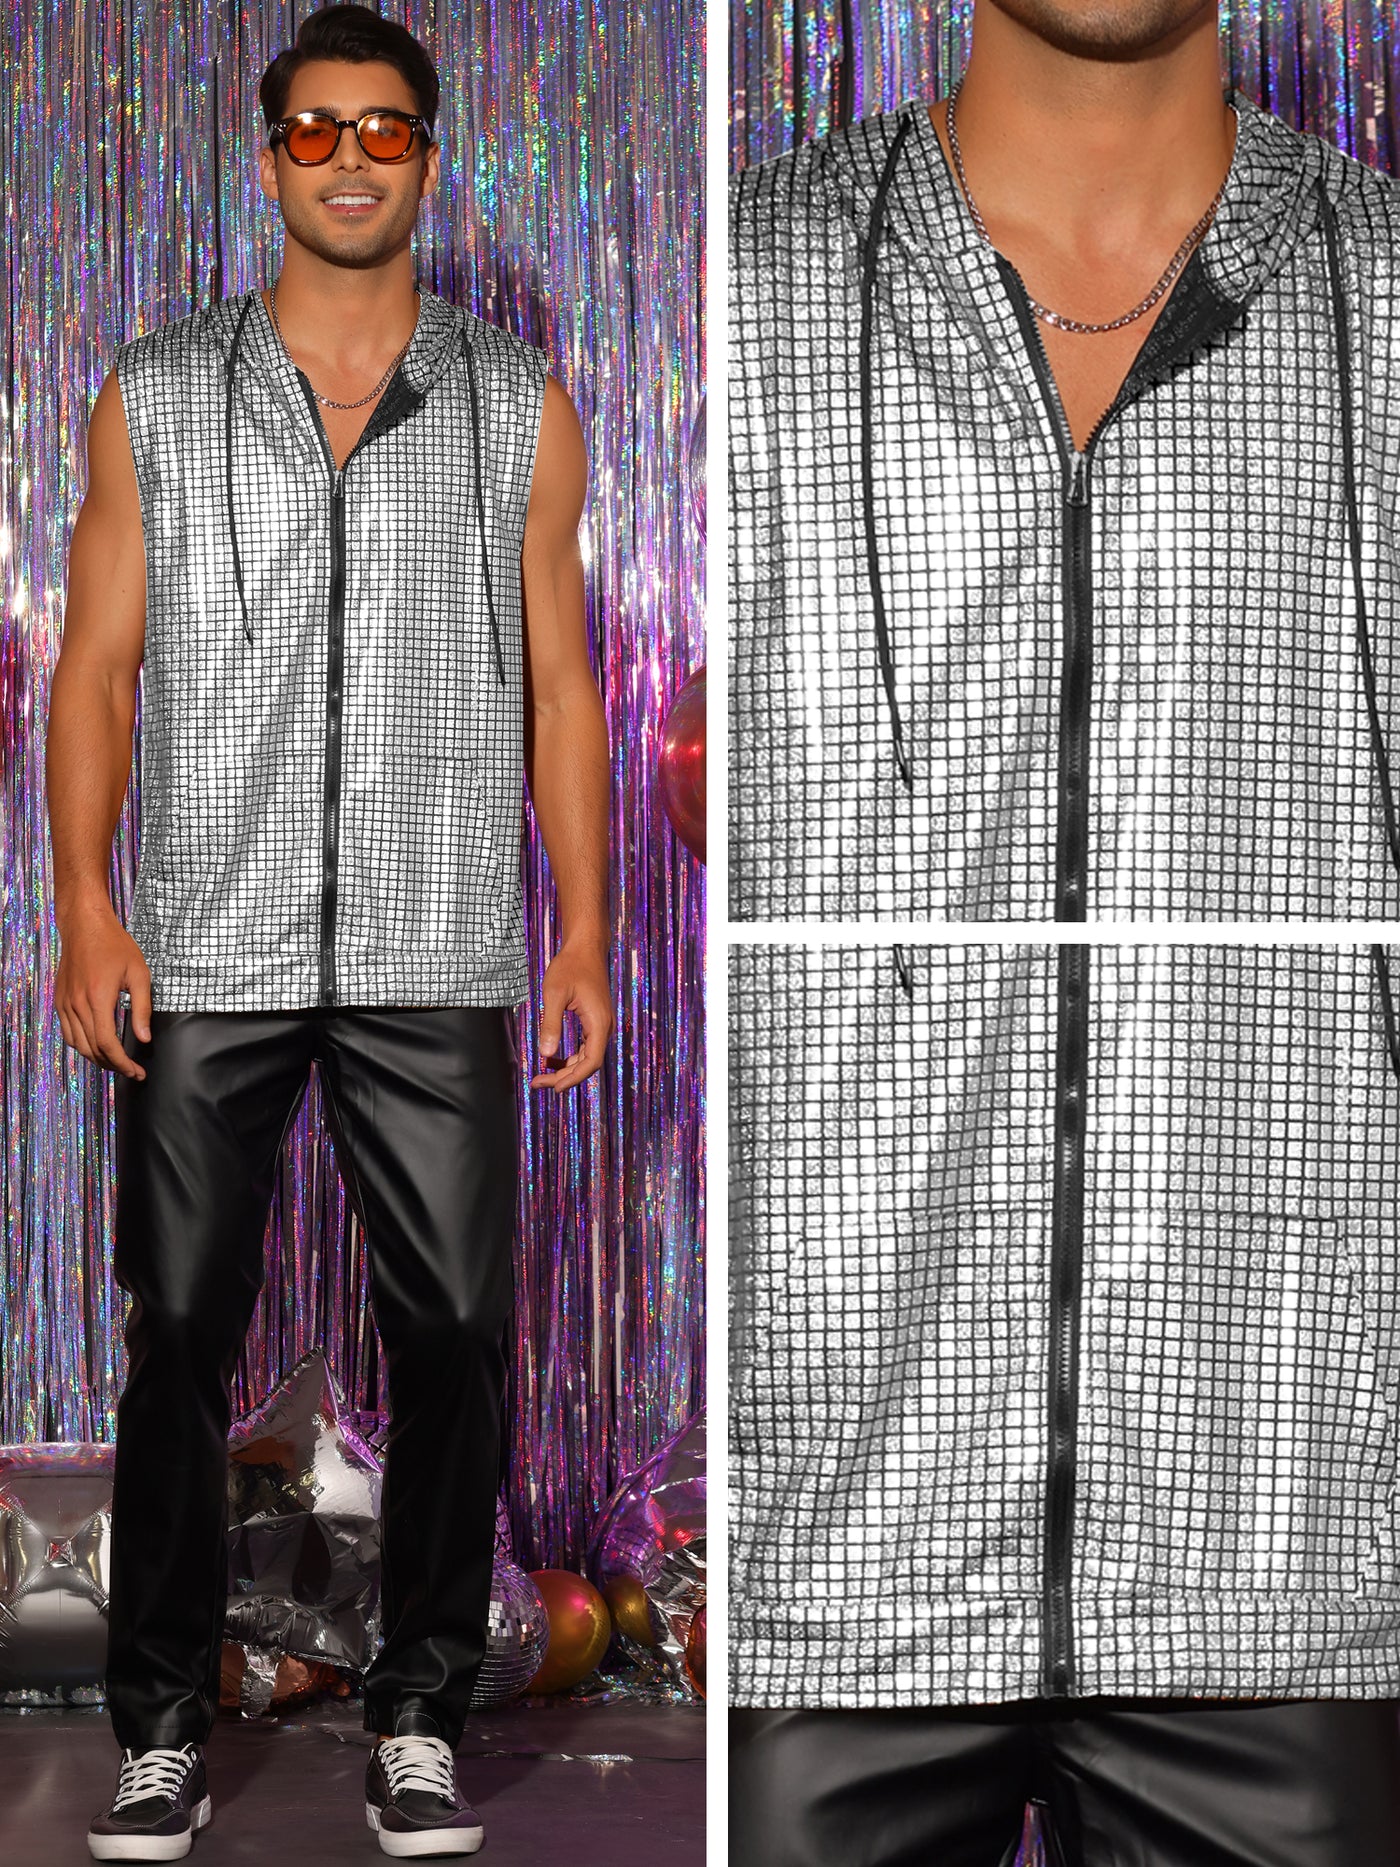 Bublédon Metallic Hooded Vest for Men's Zip Up Shiny Disco Party Sleeveless Hoodie